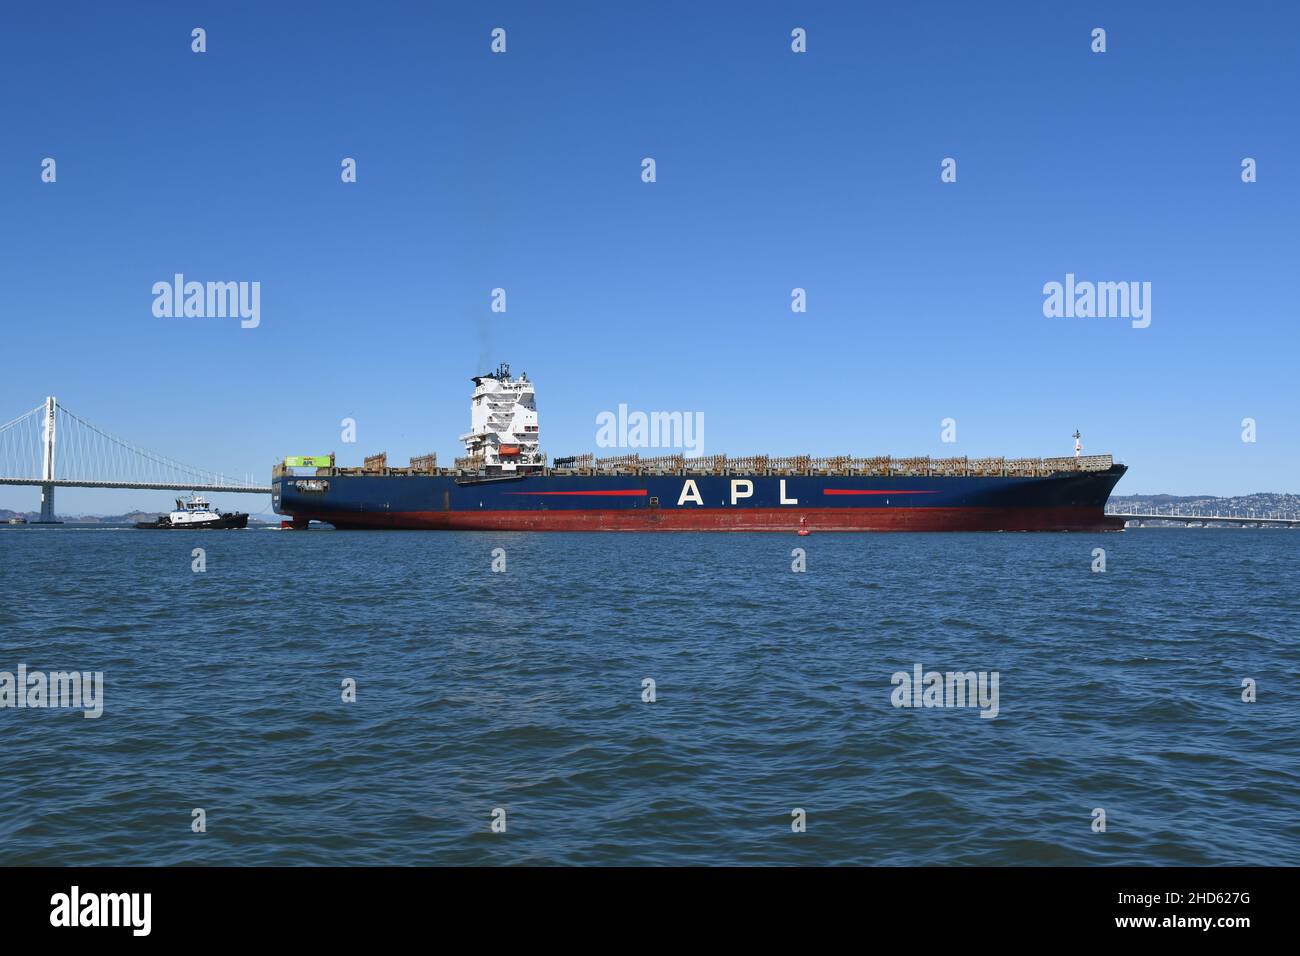 Rare empty APL container ship entering Port of Oakland. Commercial freight and container ships in San Francisco Bay, California Stock Photo